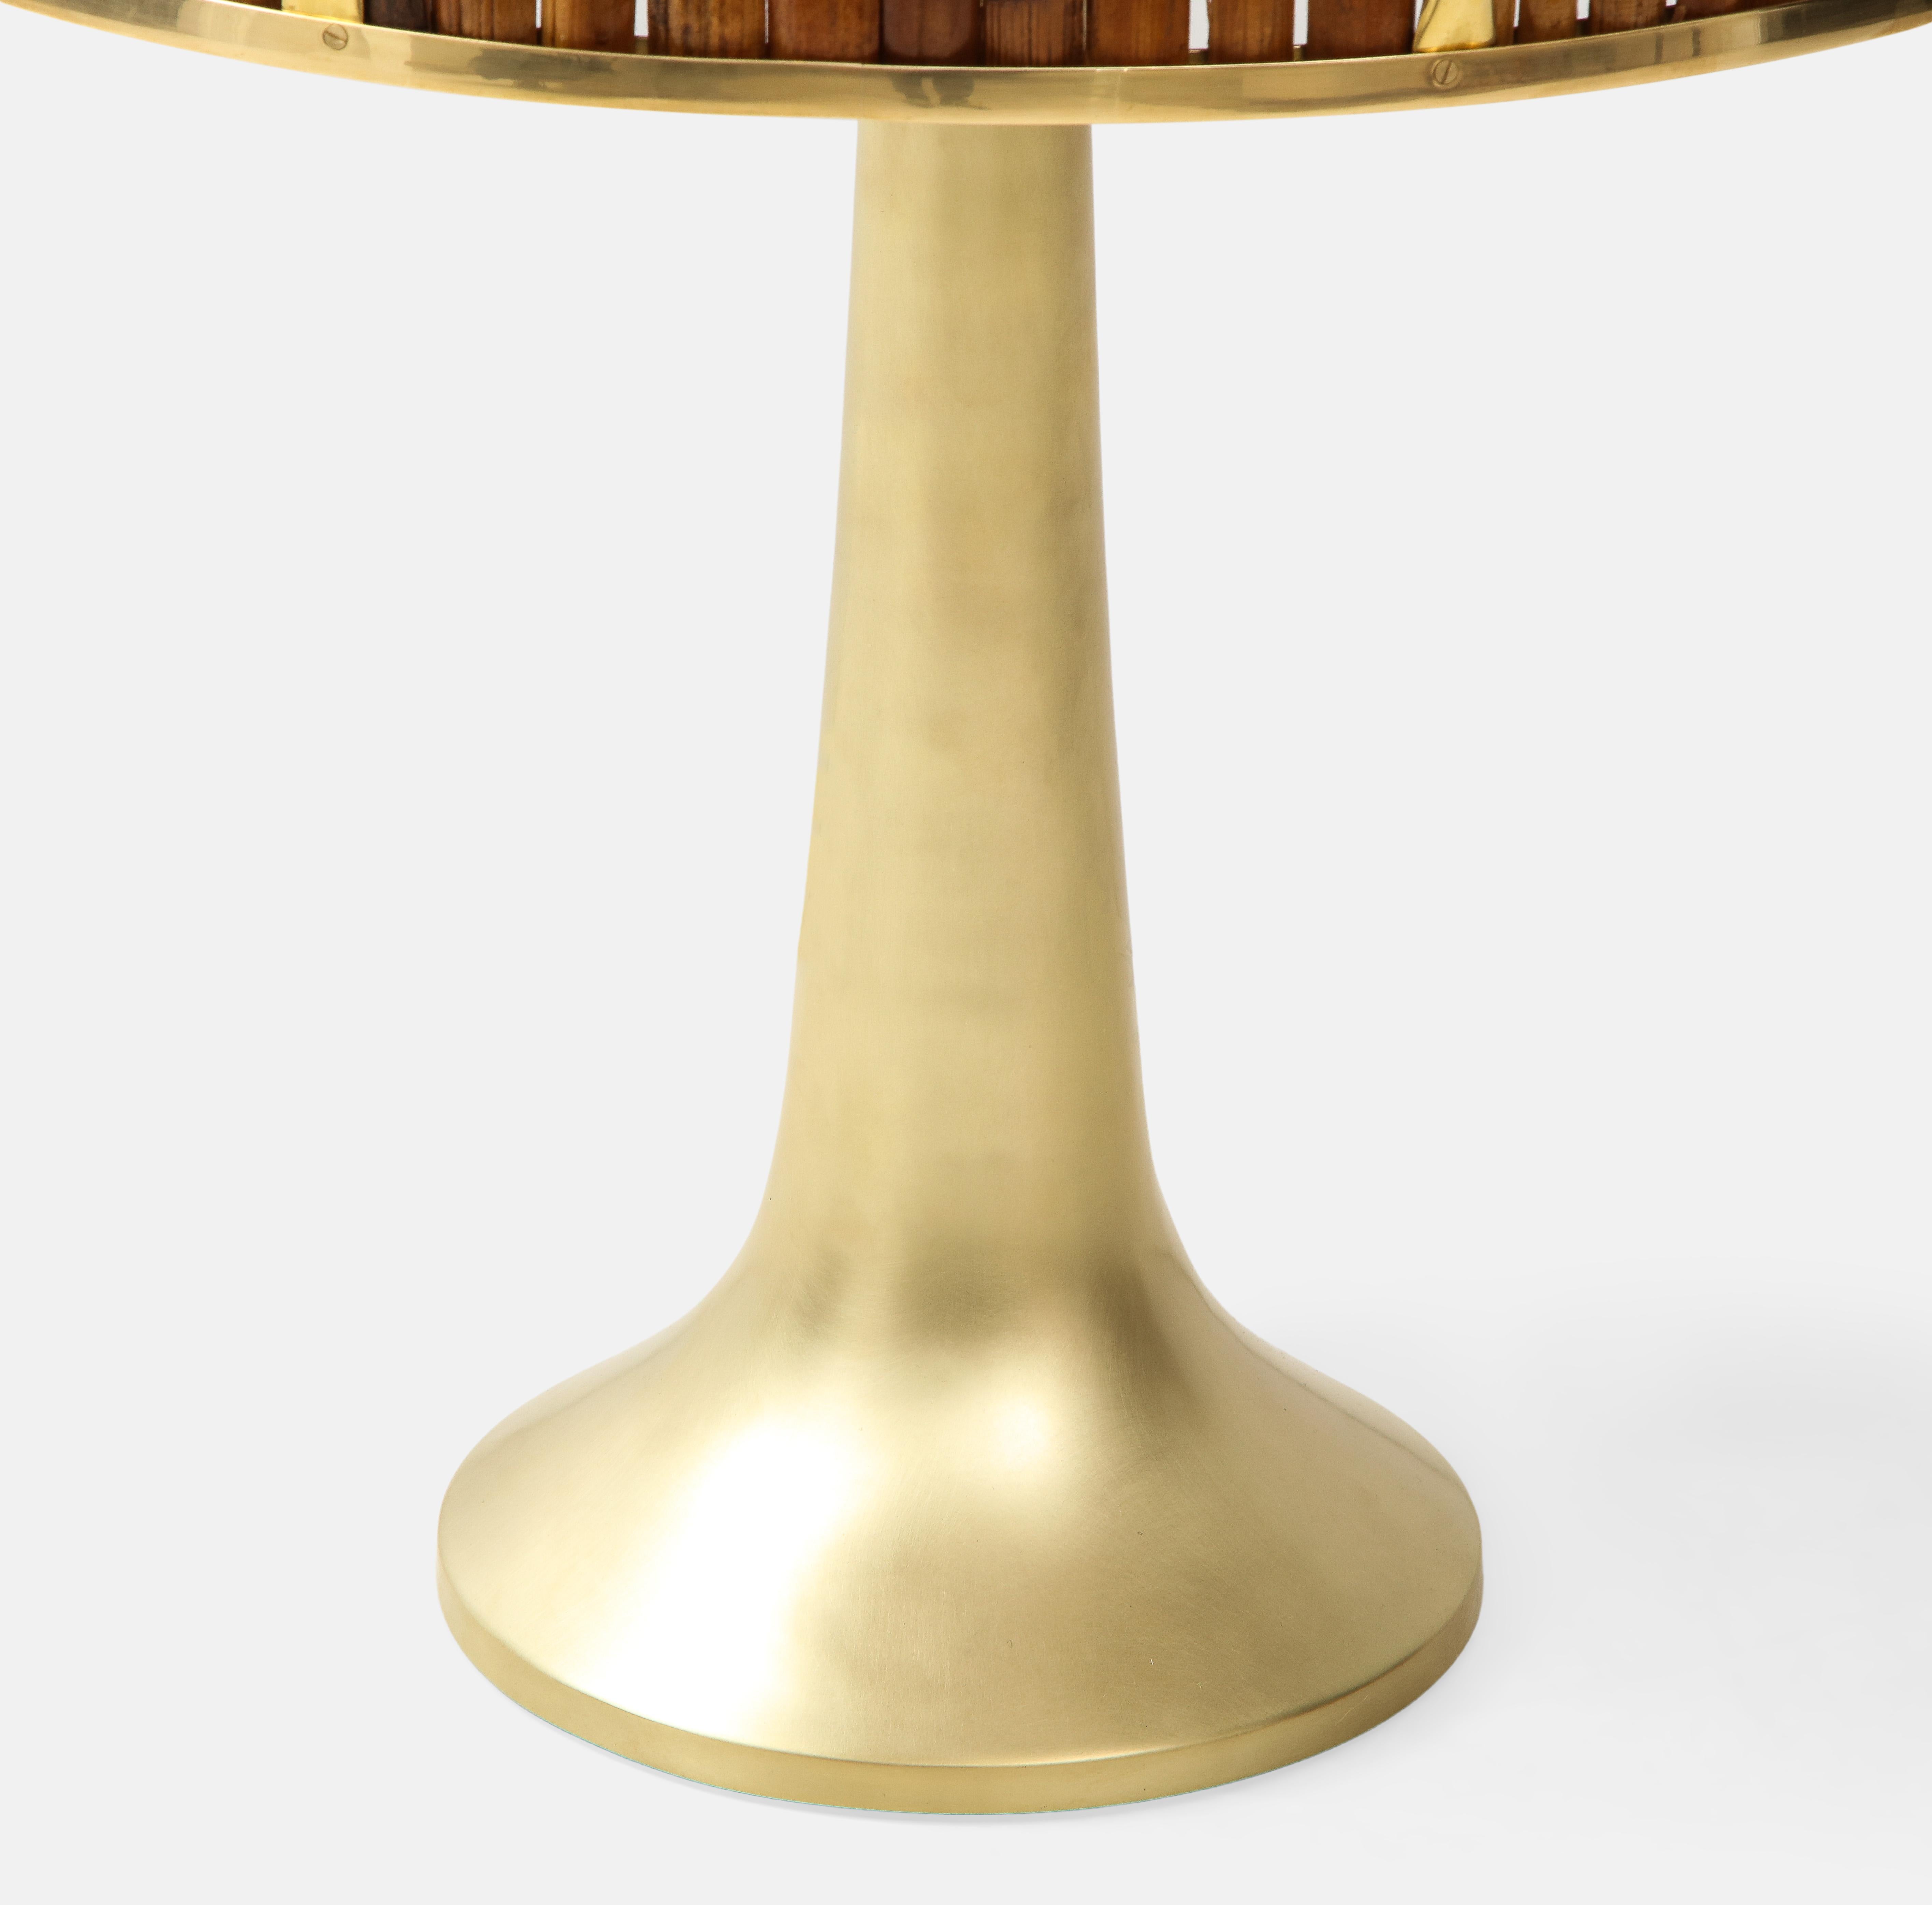 Gabriella Crespi Large Bamboo and Brass 'Fungo' Table Lamp 5